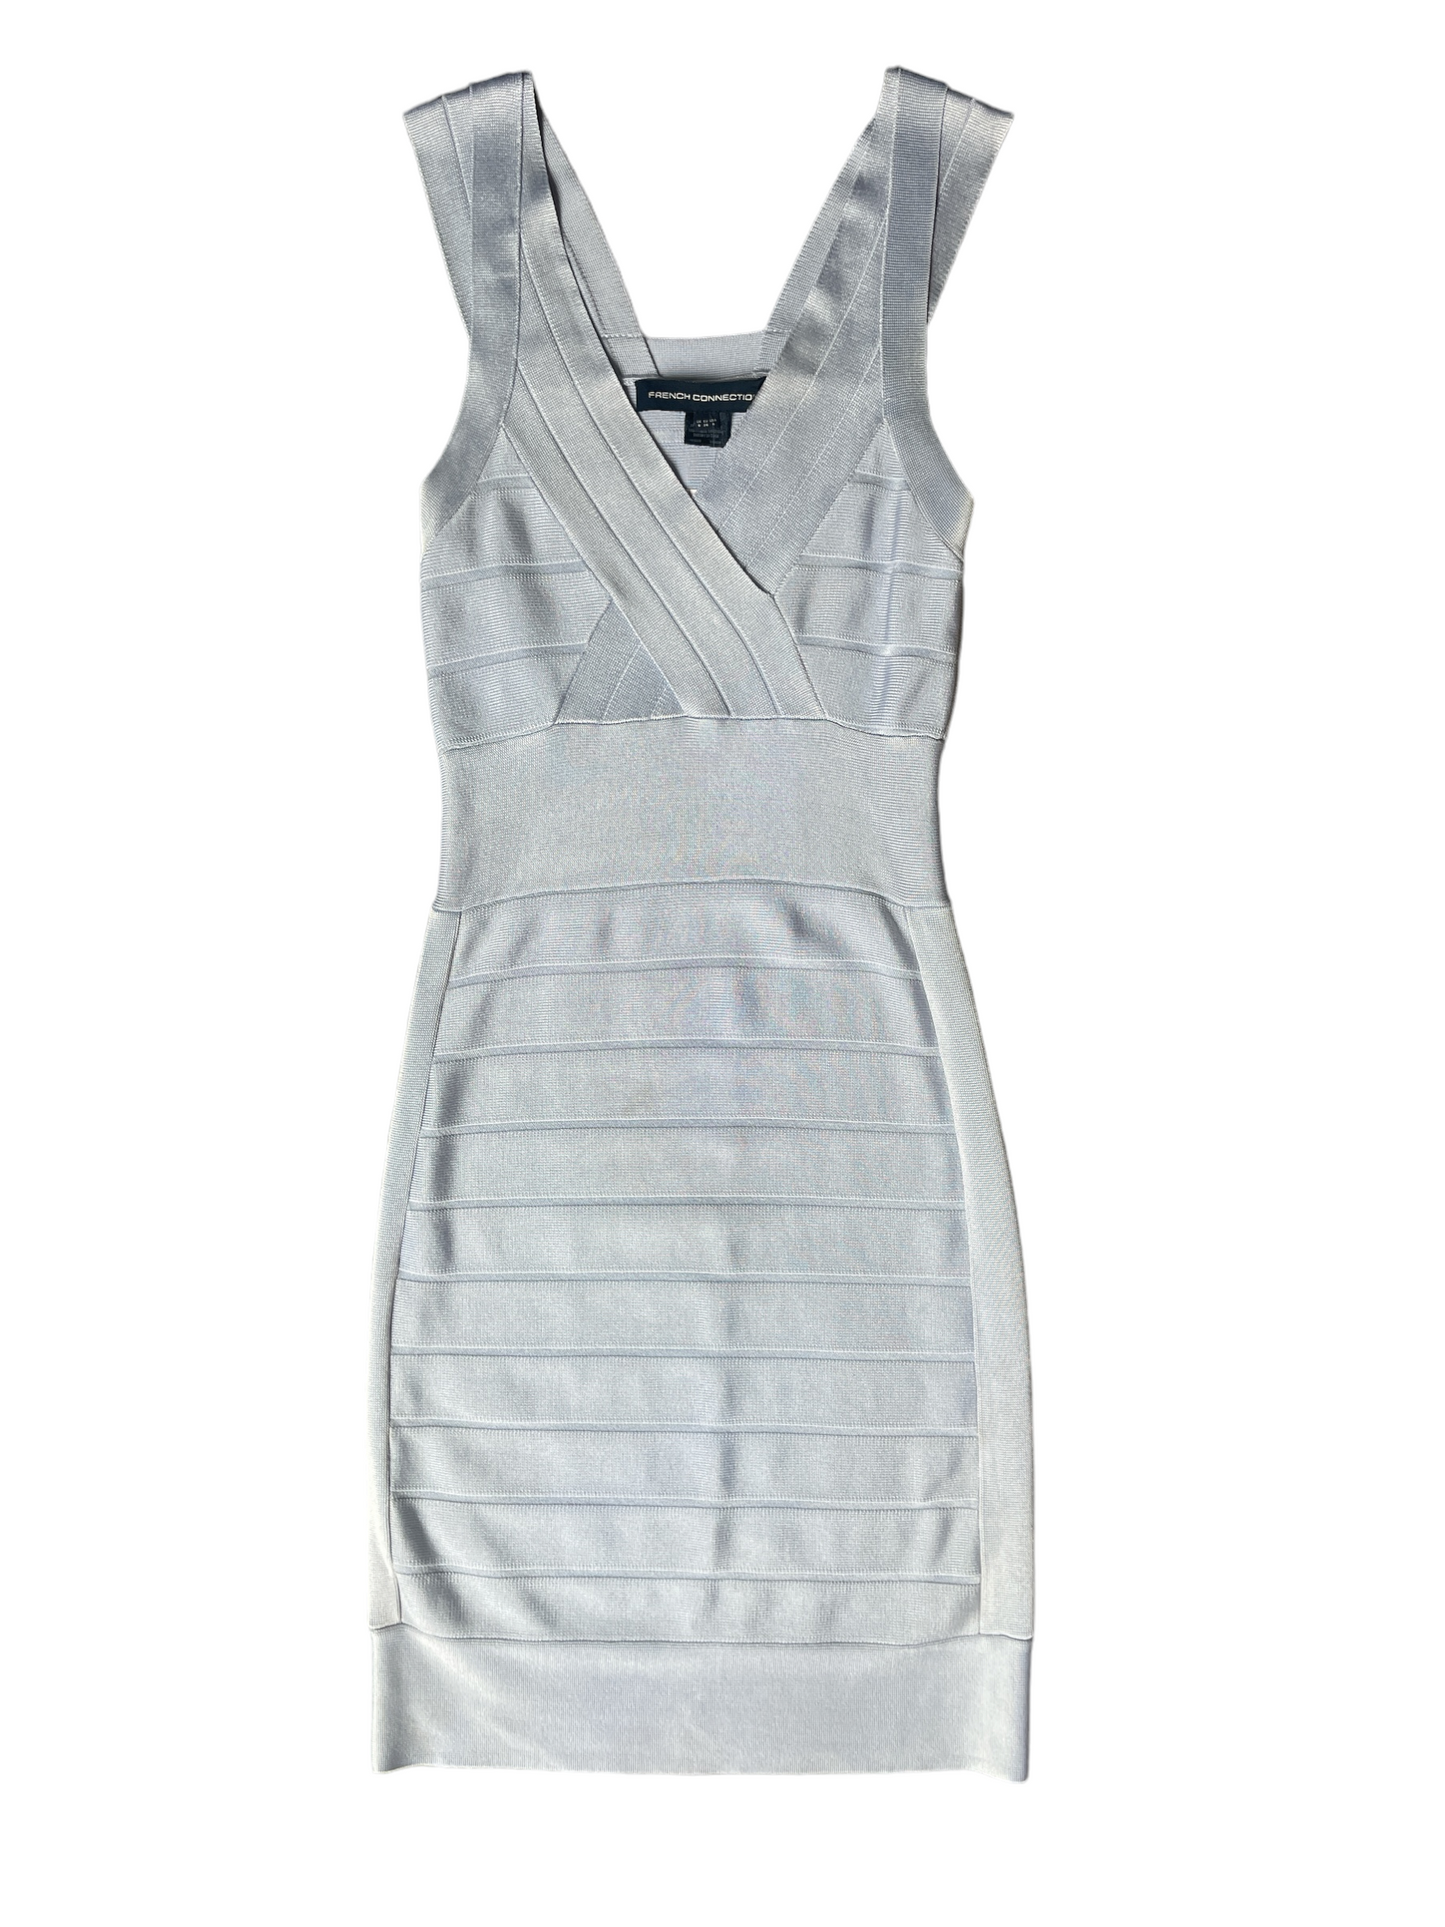 French Connection Silver Detailed Form Fitting Dress Size 4.